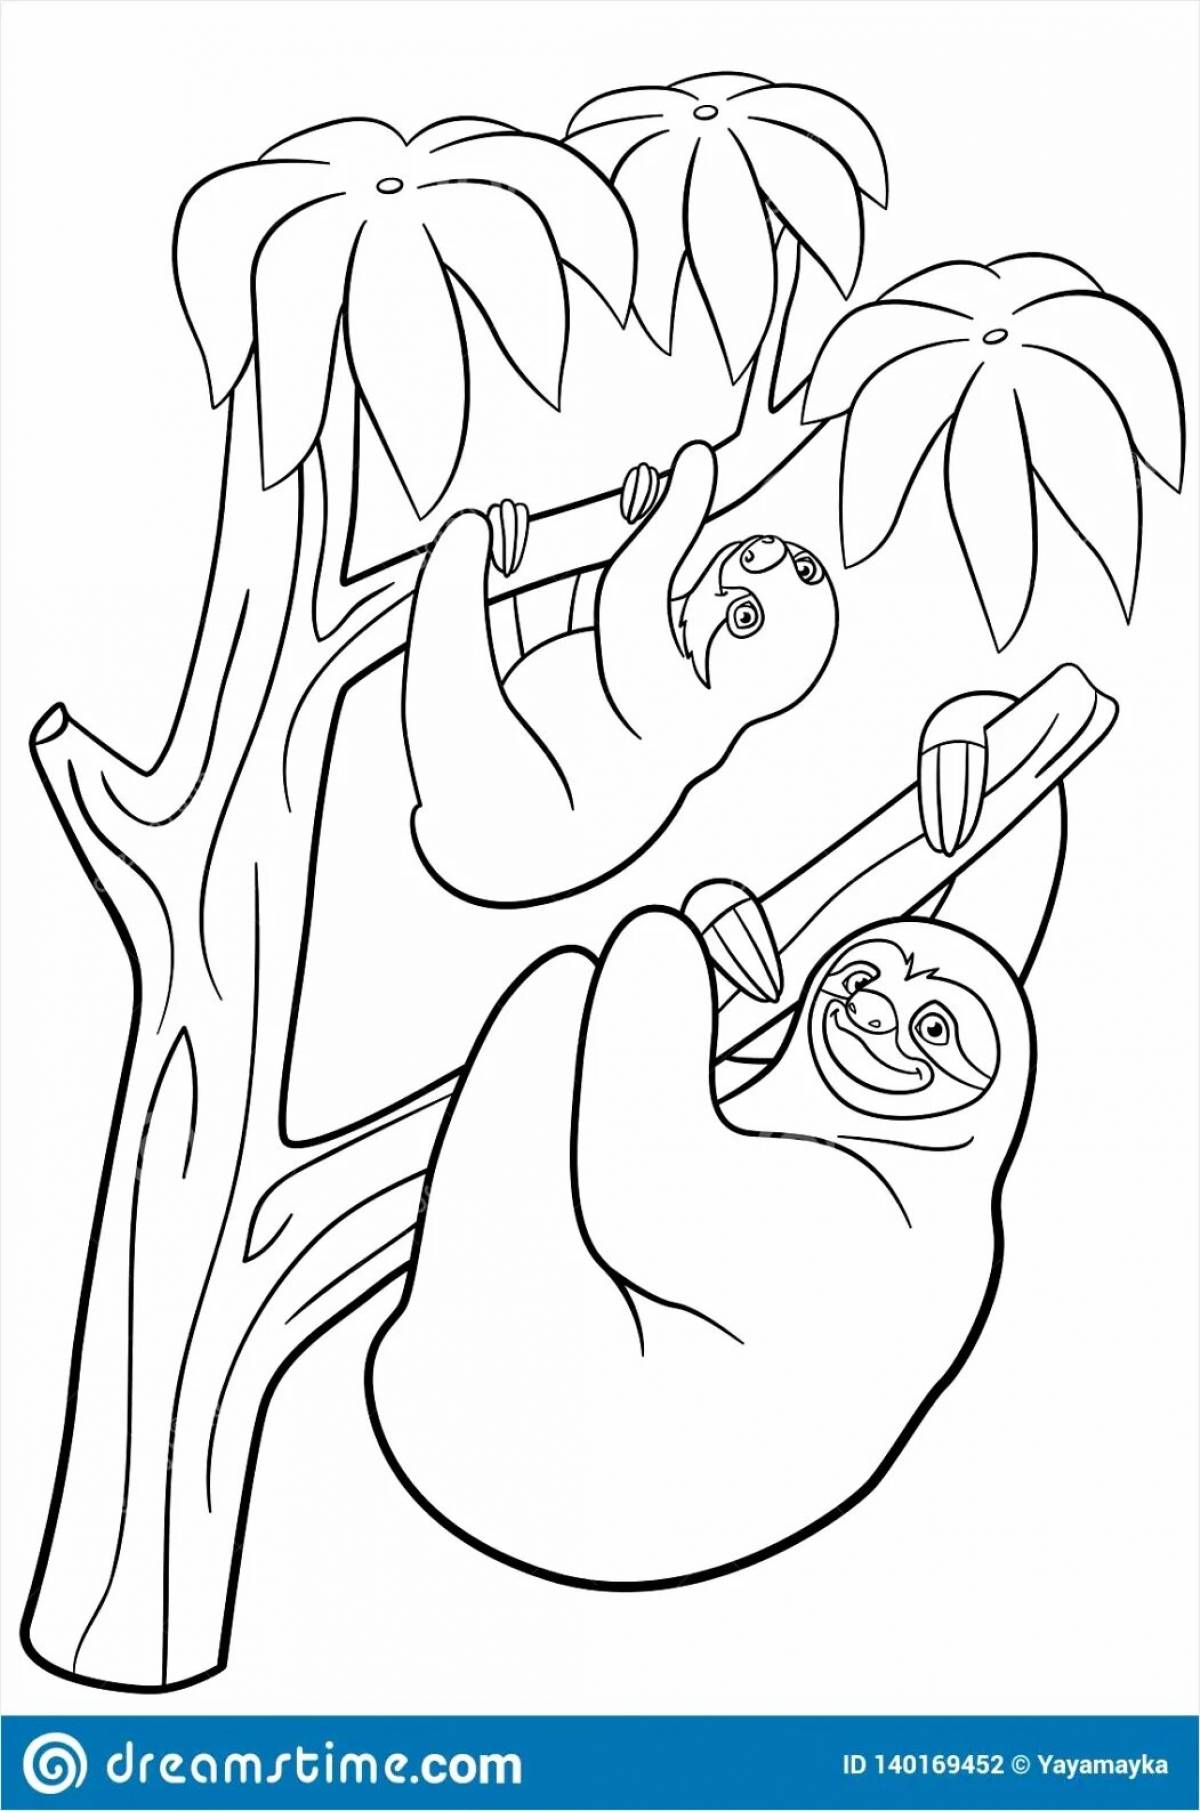 Amazing sloth coloring book for kids